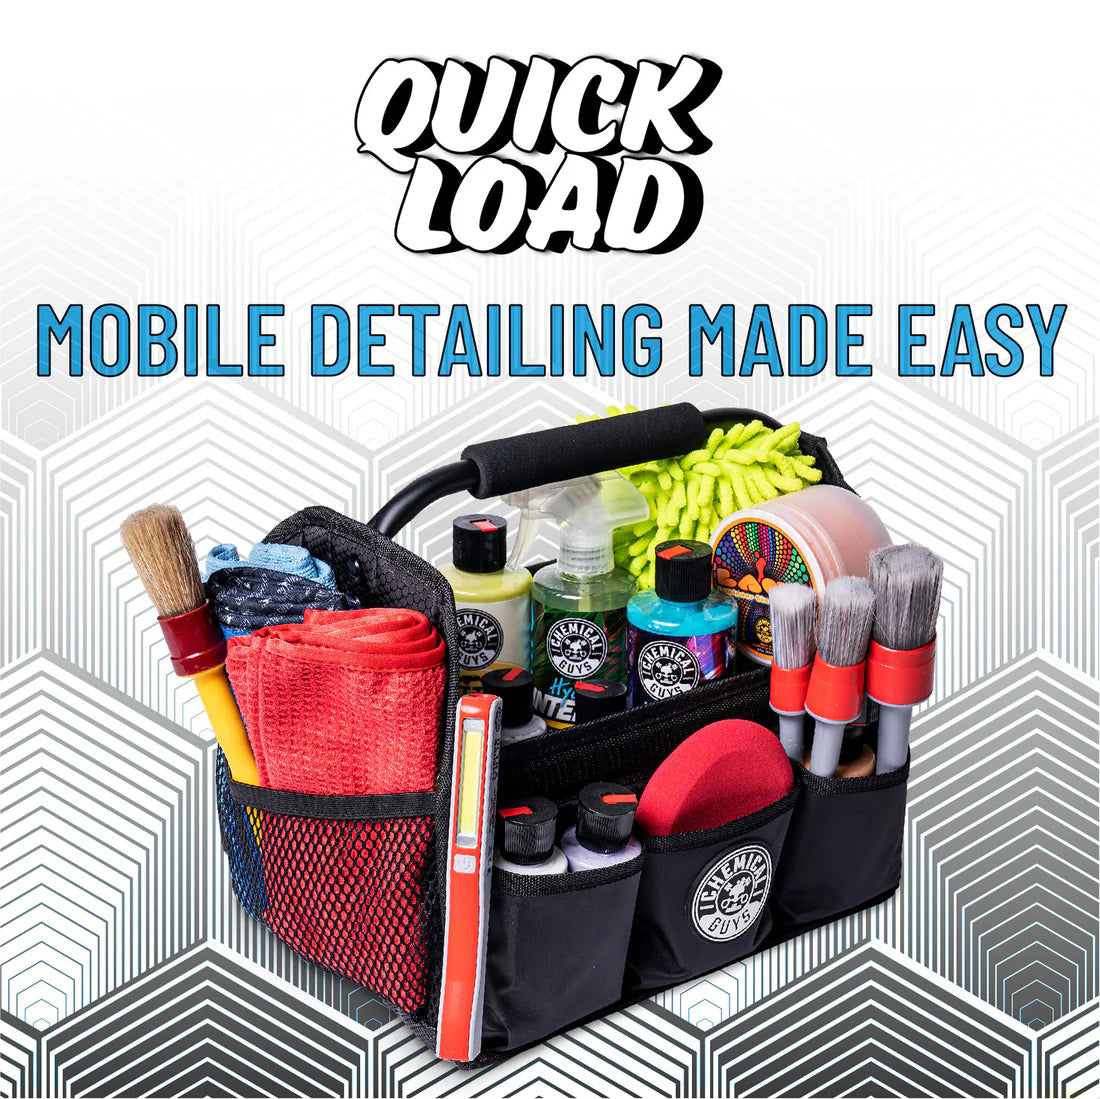 Chemical Guys Quick Load Carrying Caddy & Storage Organiser